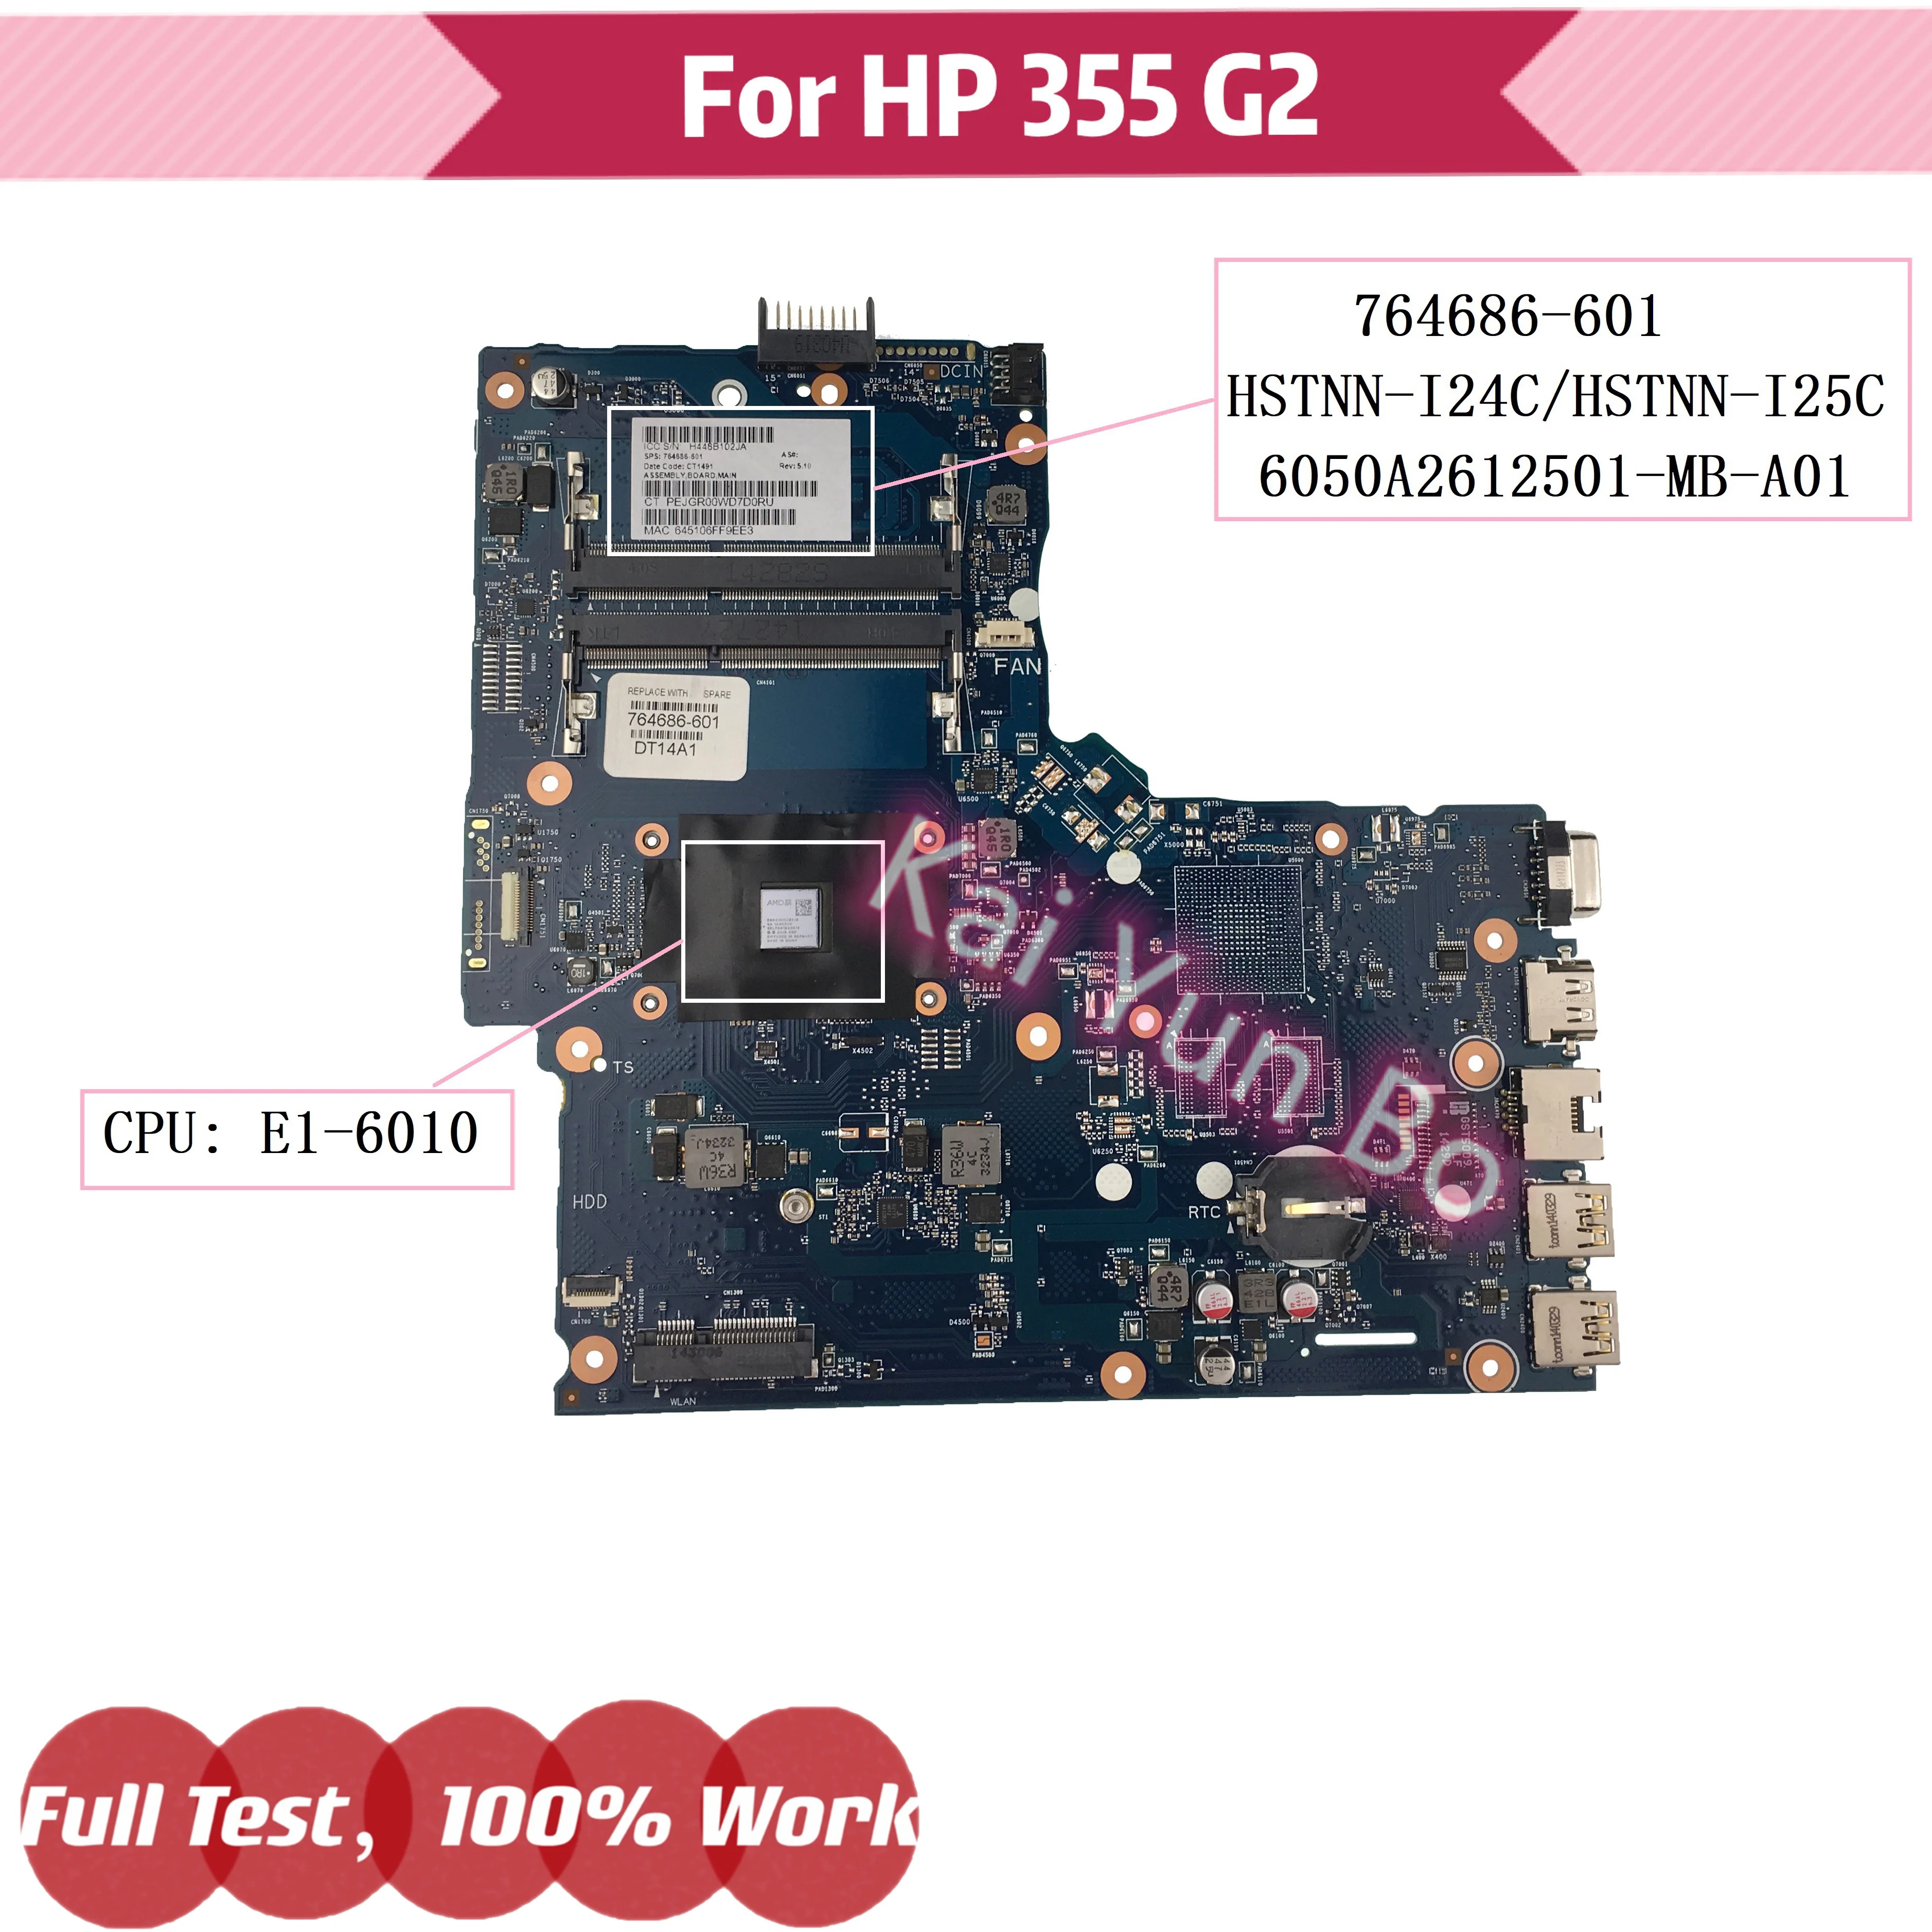 HSTNN-I24C HSTNN-I25C 6050A2612501 For HP 355 G2 Laptop Motherboard 764686-601 764686-501 764686-001 Mainboard with E1-6010 CPU